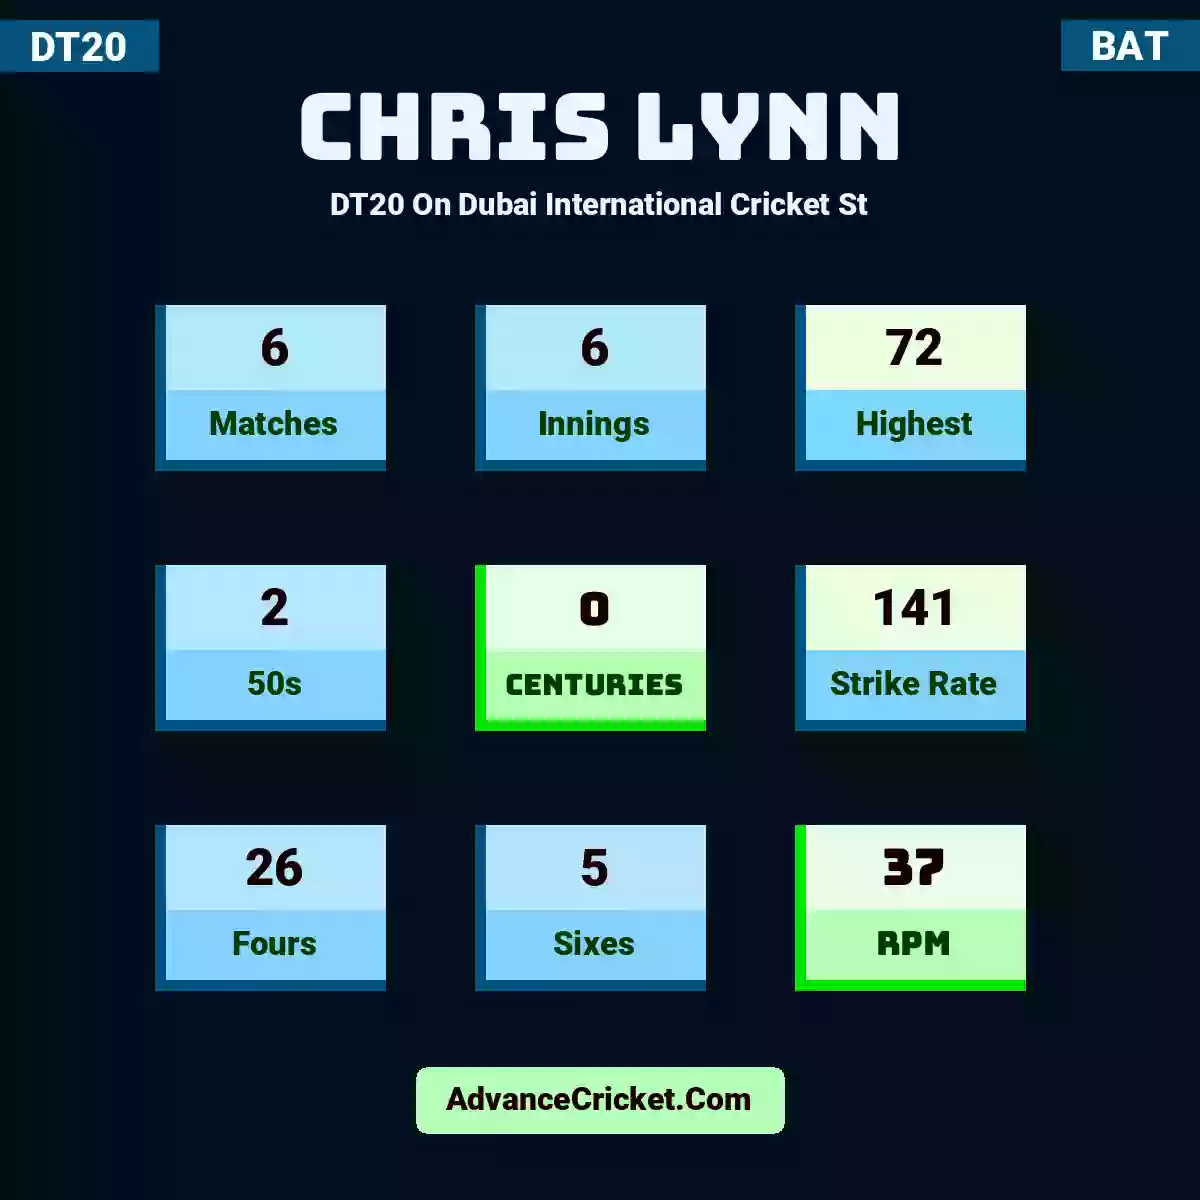 Chris Lynn DT20  On Dubai International Cricket St, Chris Lynn played 6 matches, scored 72 runs as highest, 2 half-centuries, and 0 centuries, with a strike rate of 141. C.Lynn hit 26 fours and 5 sixes, with an RPM of 37.